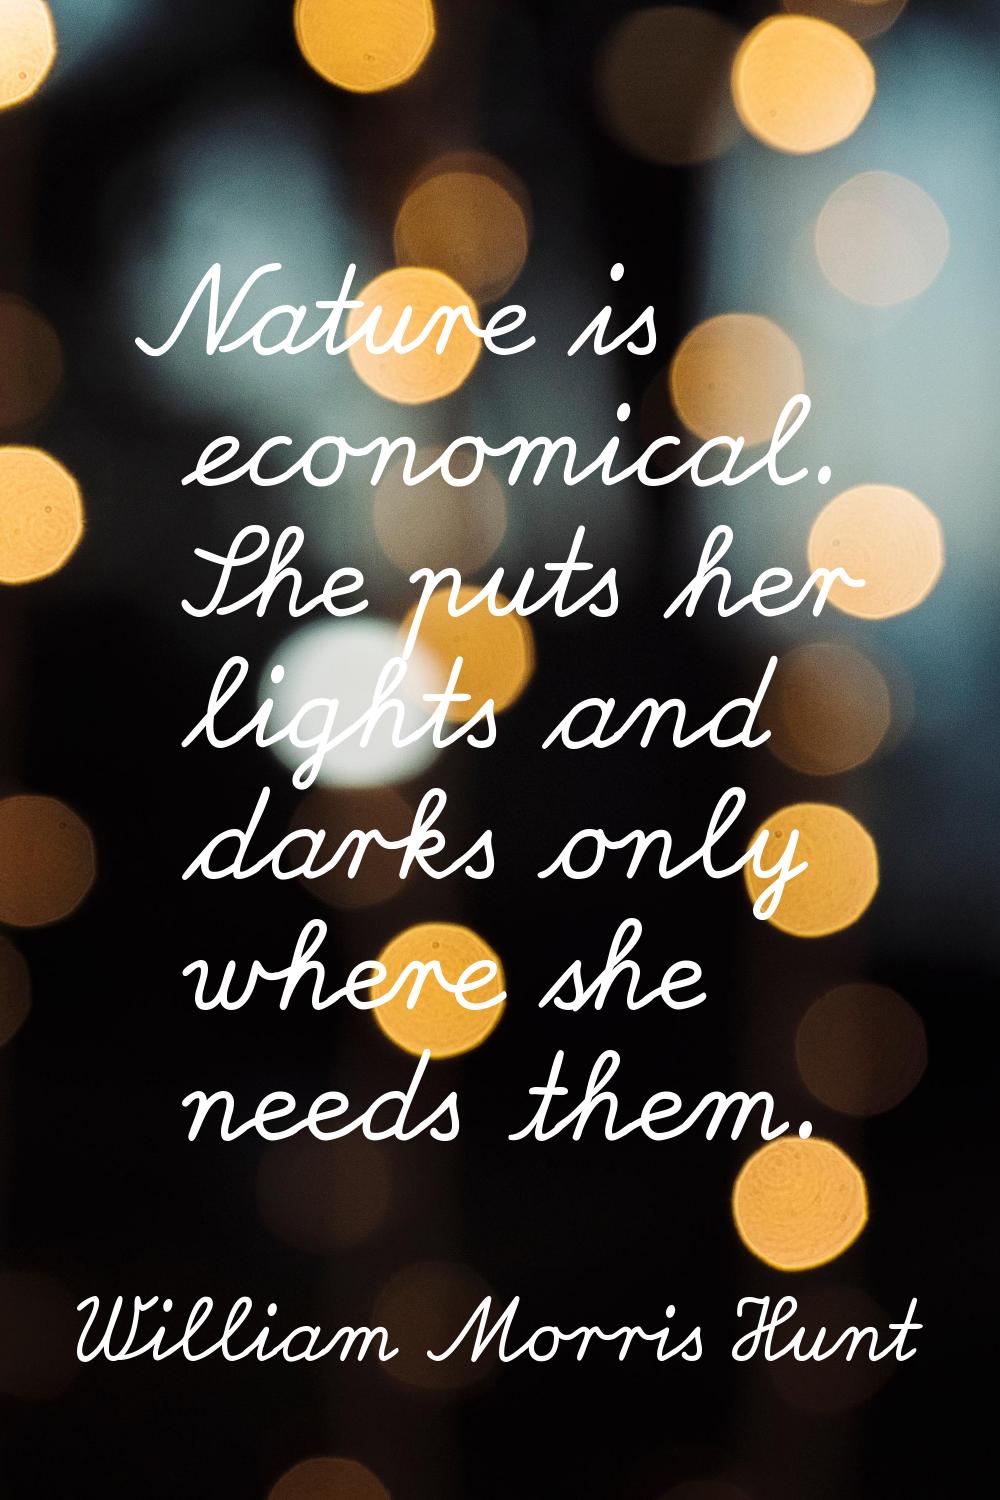 Nature is economical. She puts her lights and darks only where she needs them.